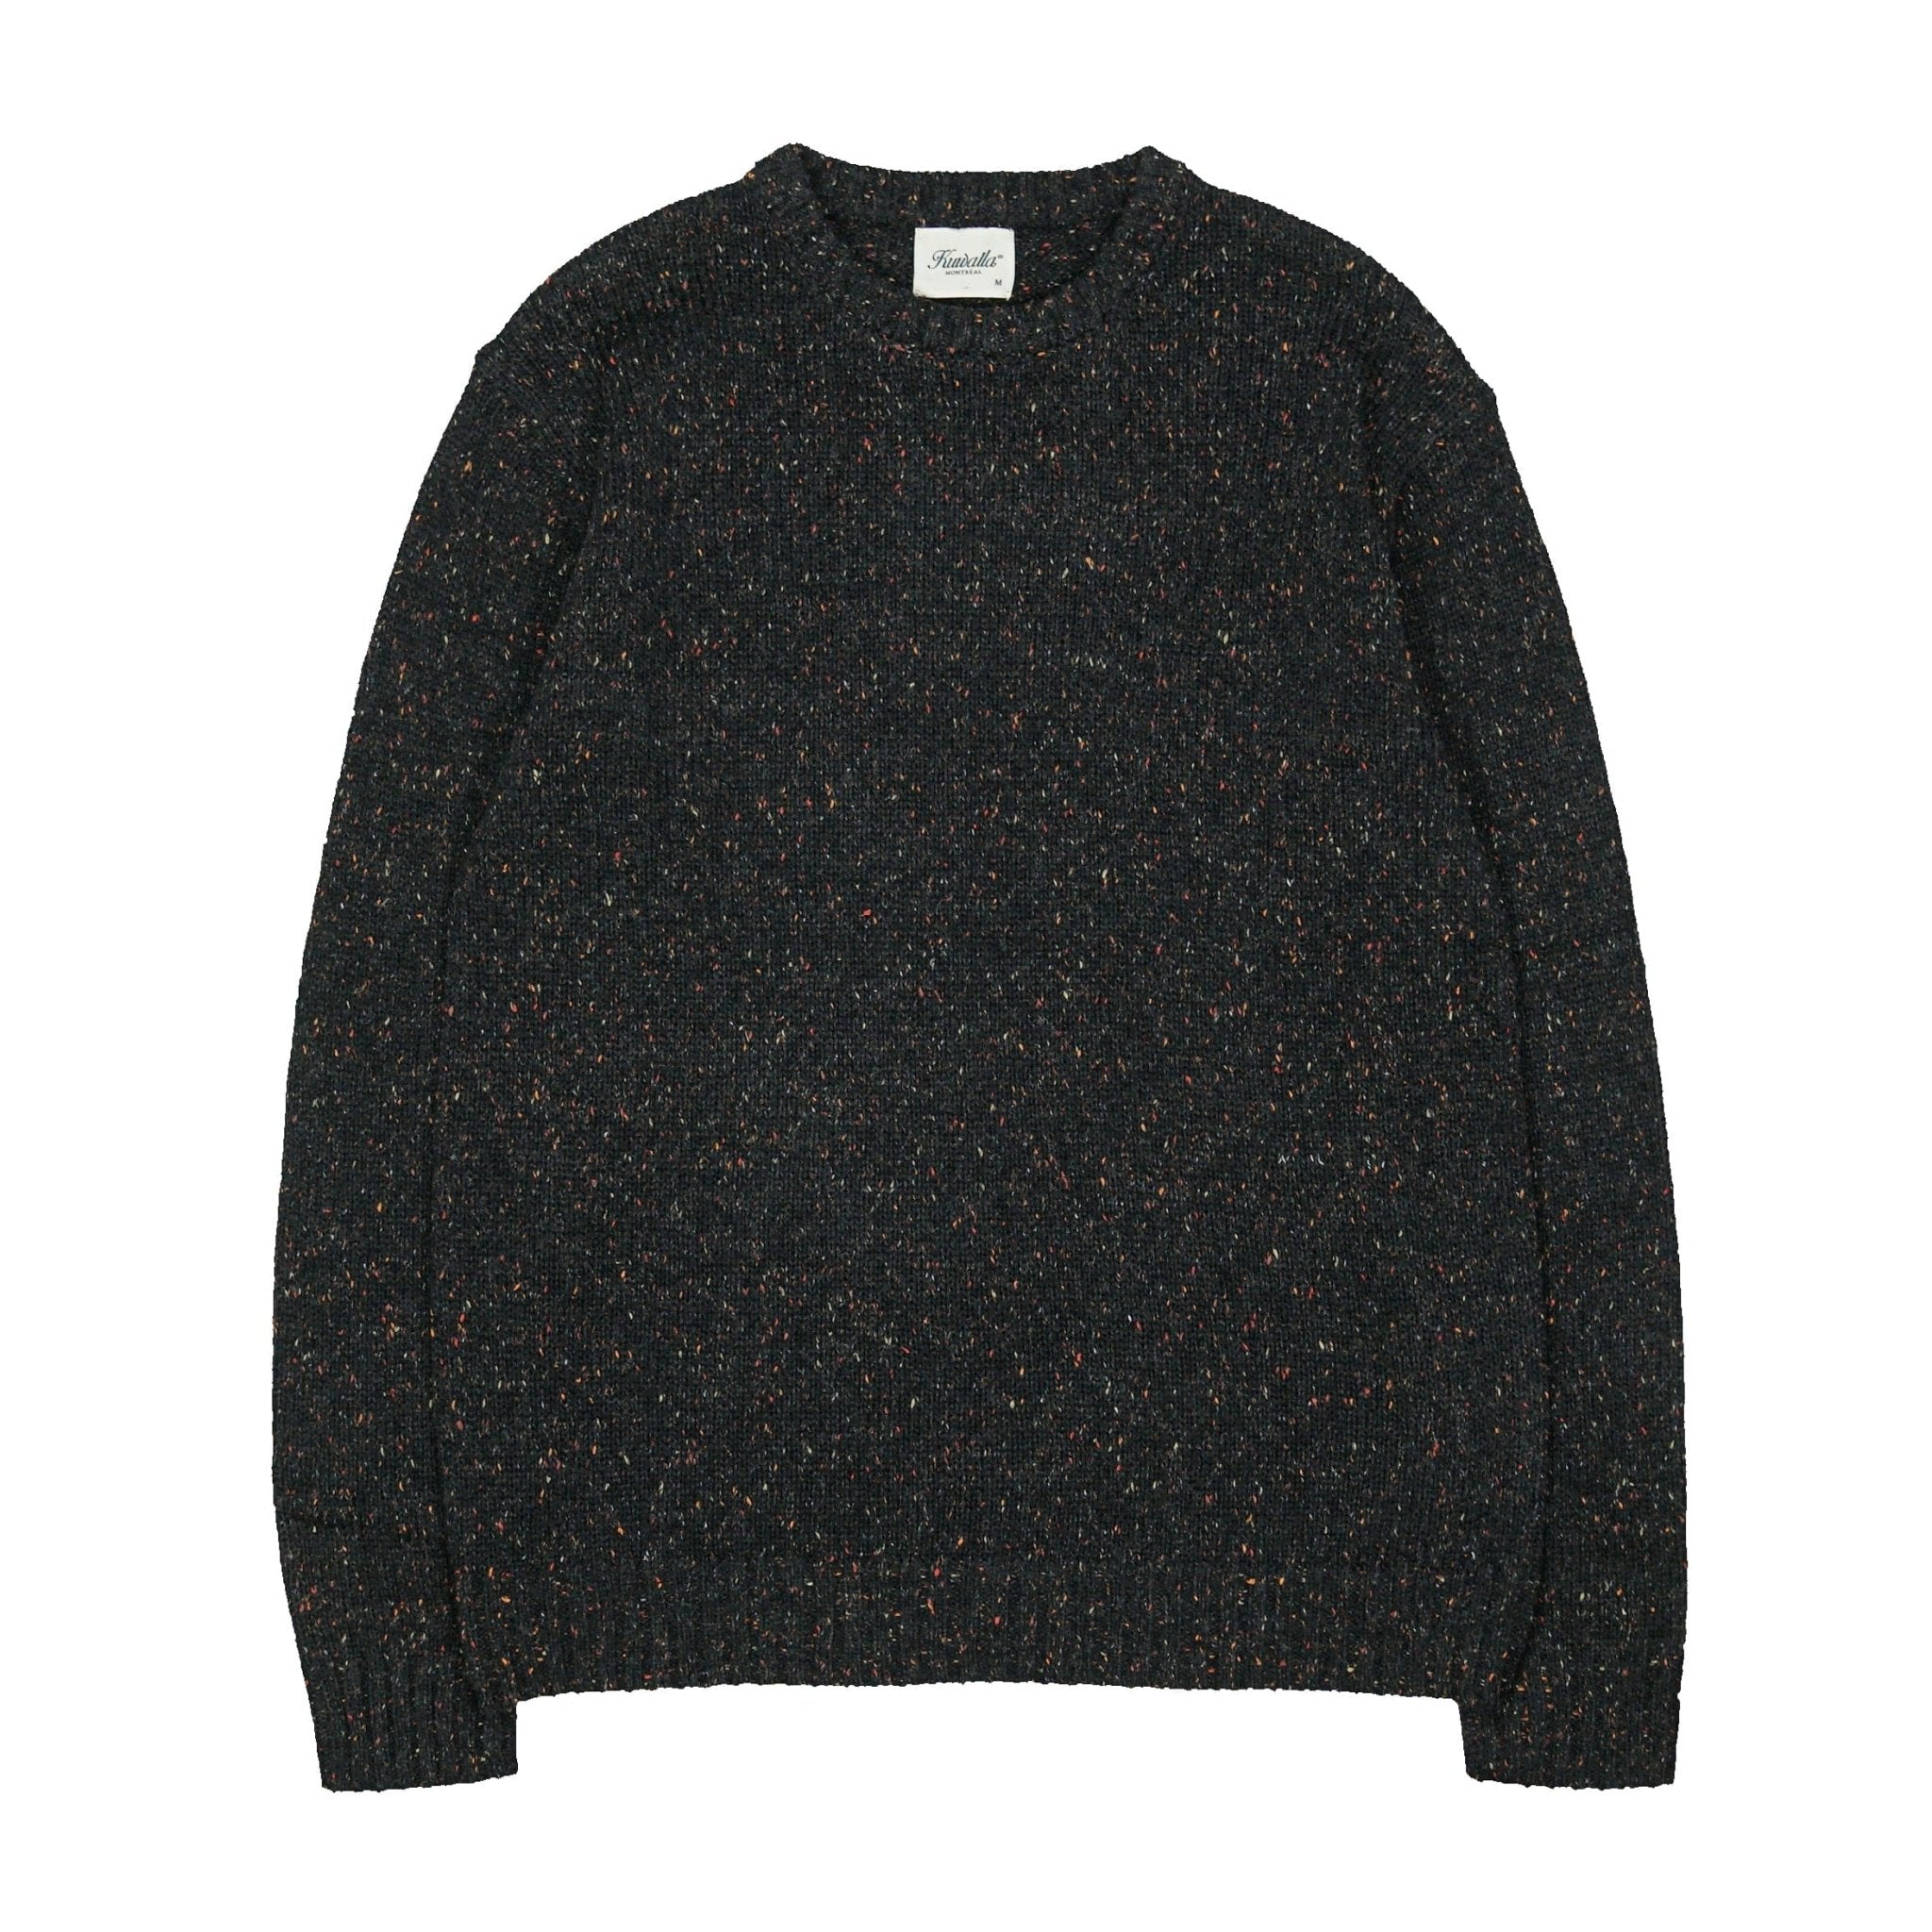 Speckled Sweater in black - Kuwalla Tee - State Of Flux